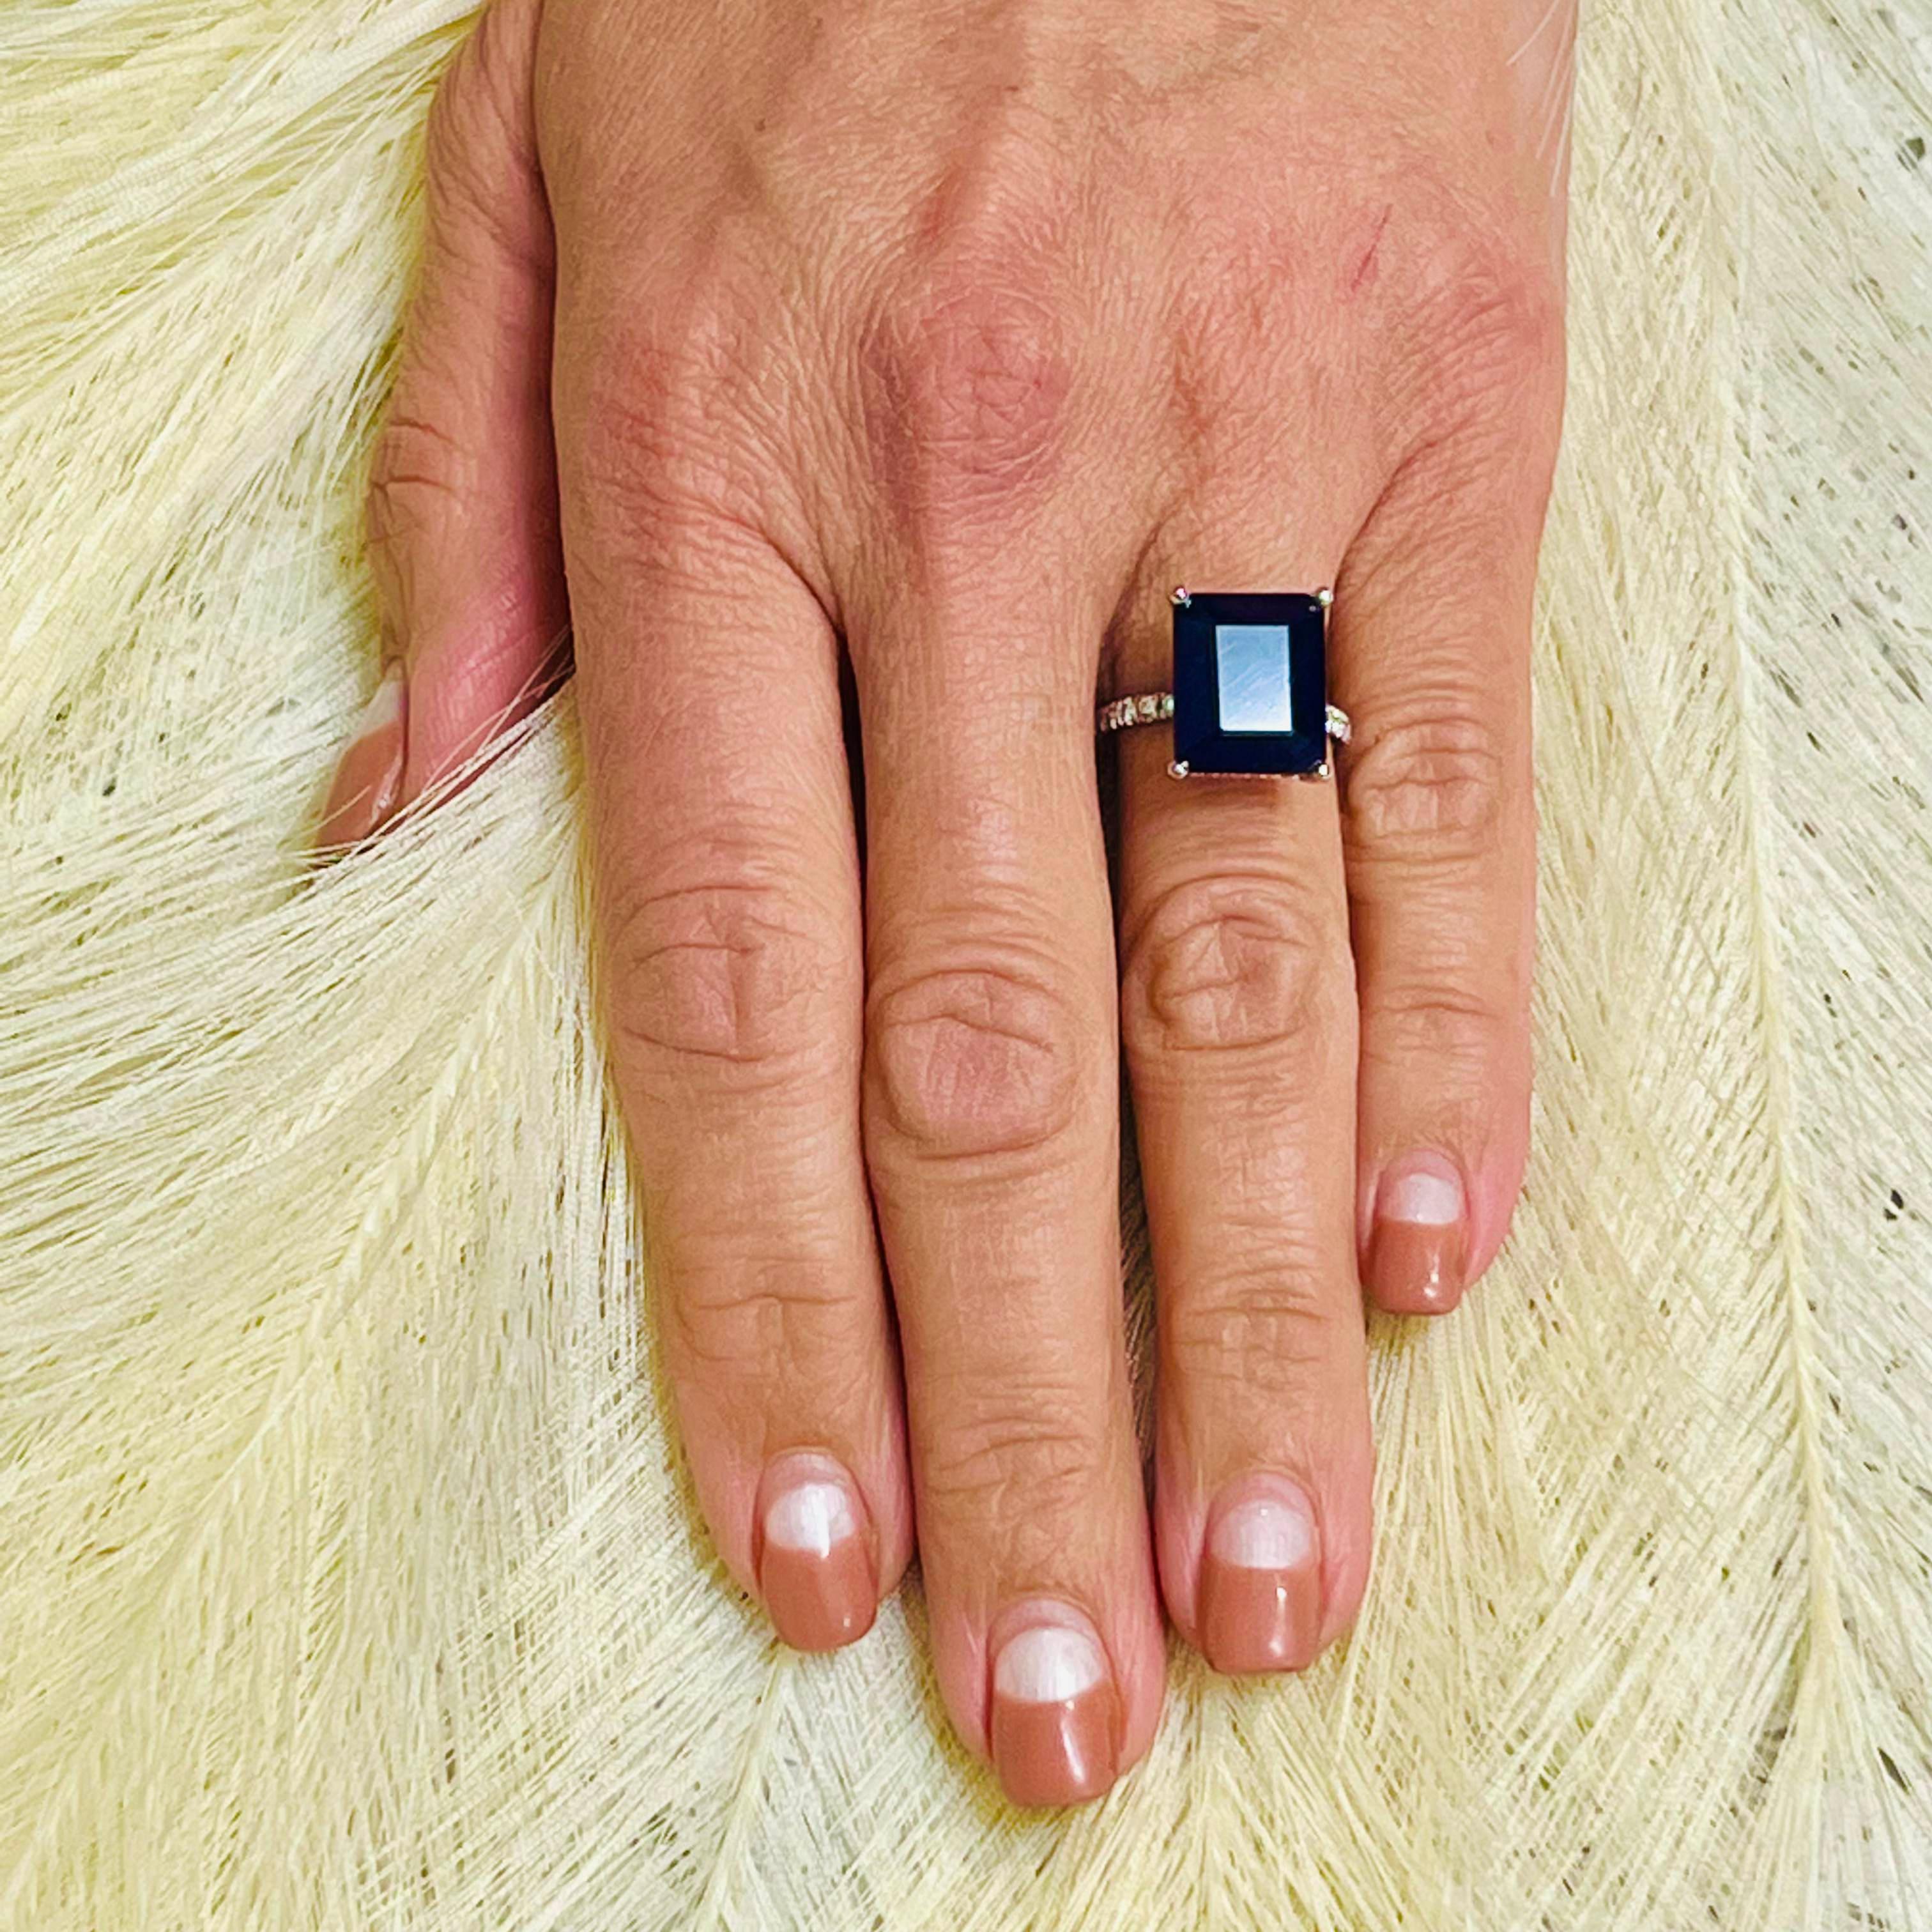 Composite Sapphire Diamond Ring Size 6.75 14k Y Gold 12.05 TCW Certified $3,000 216188


This is a Unique Custom Made Glamorous Piece of Jewelry!

Nothing says, “I Love you” more than Diamonds and Pearls!

This Sapphire ring has been Certified,